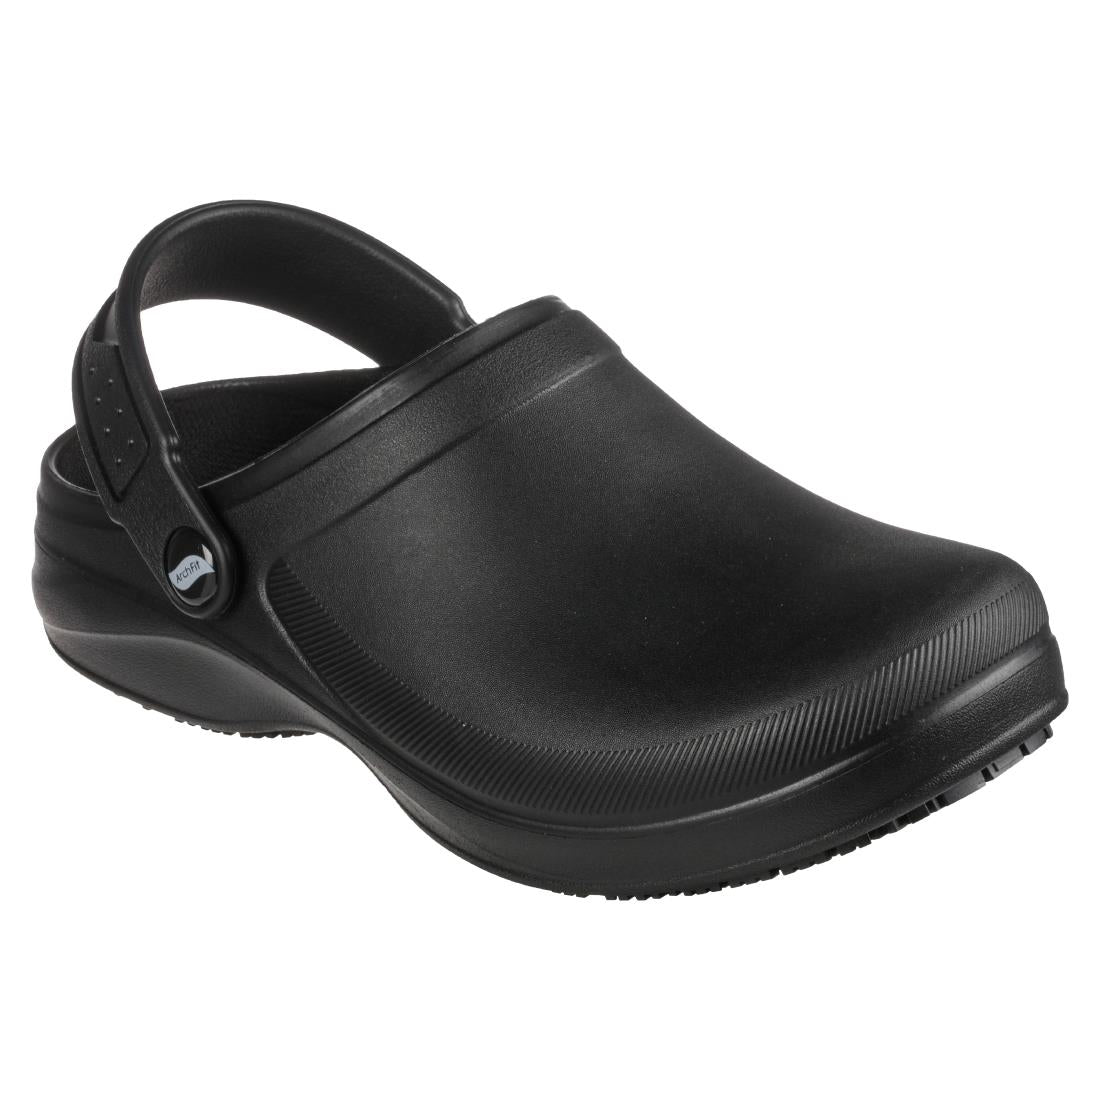 BB713-36 Skechers Womens Riverbound Pasay Slip Resistant Clogs